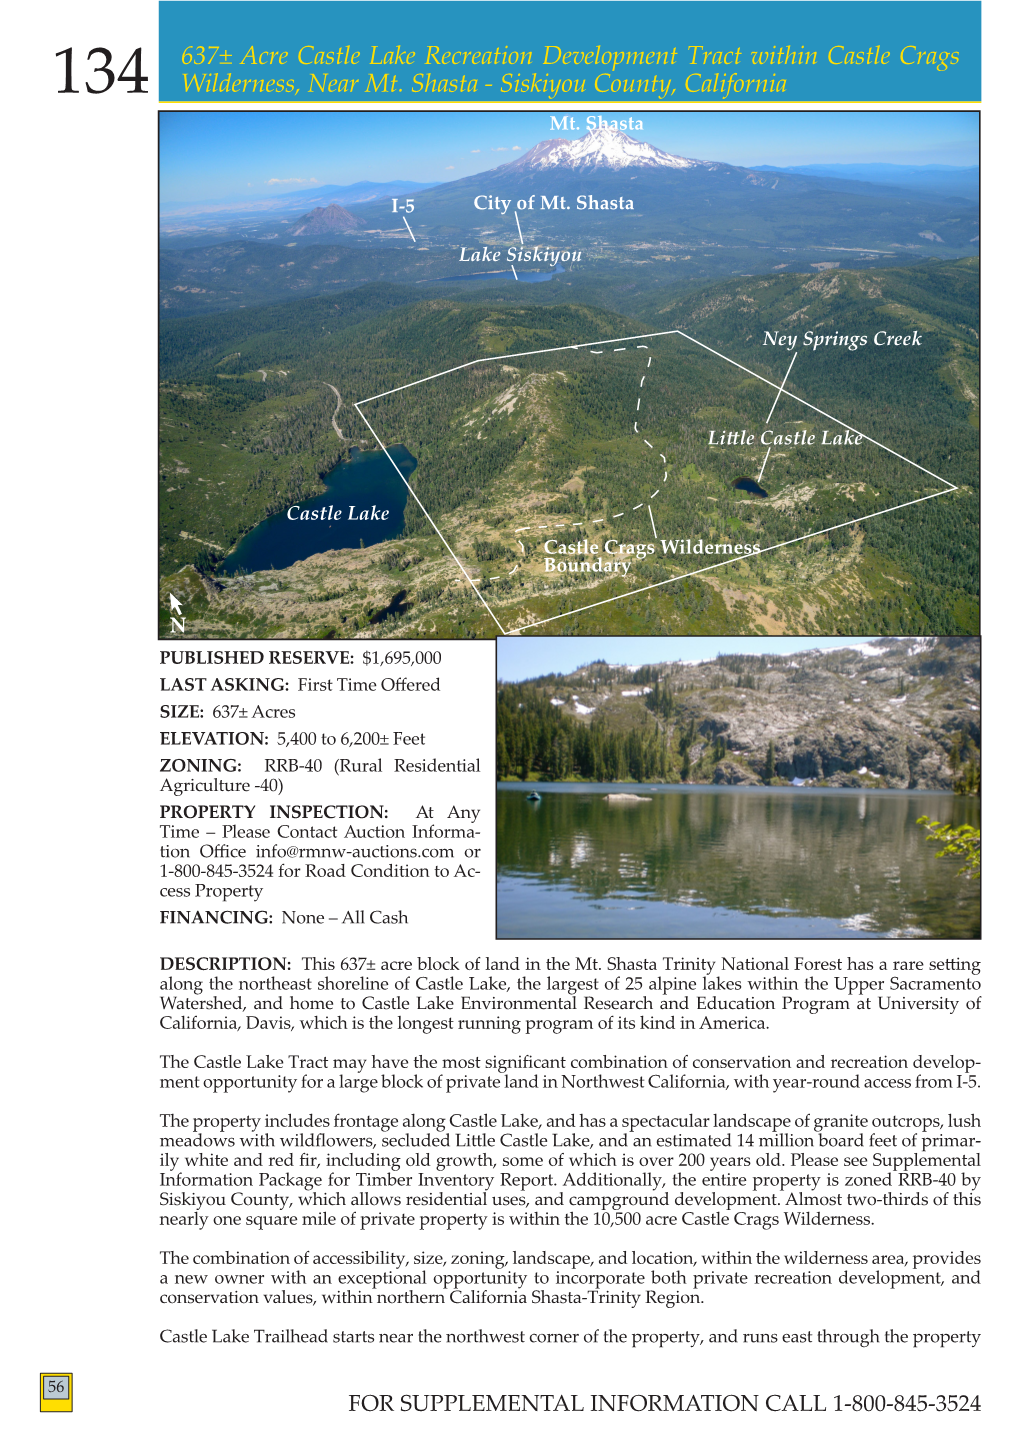 637± Acre Castle Lake Recreation Development Tract Within Castle Crags Wilderness, Near Mt. Shasta